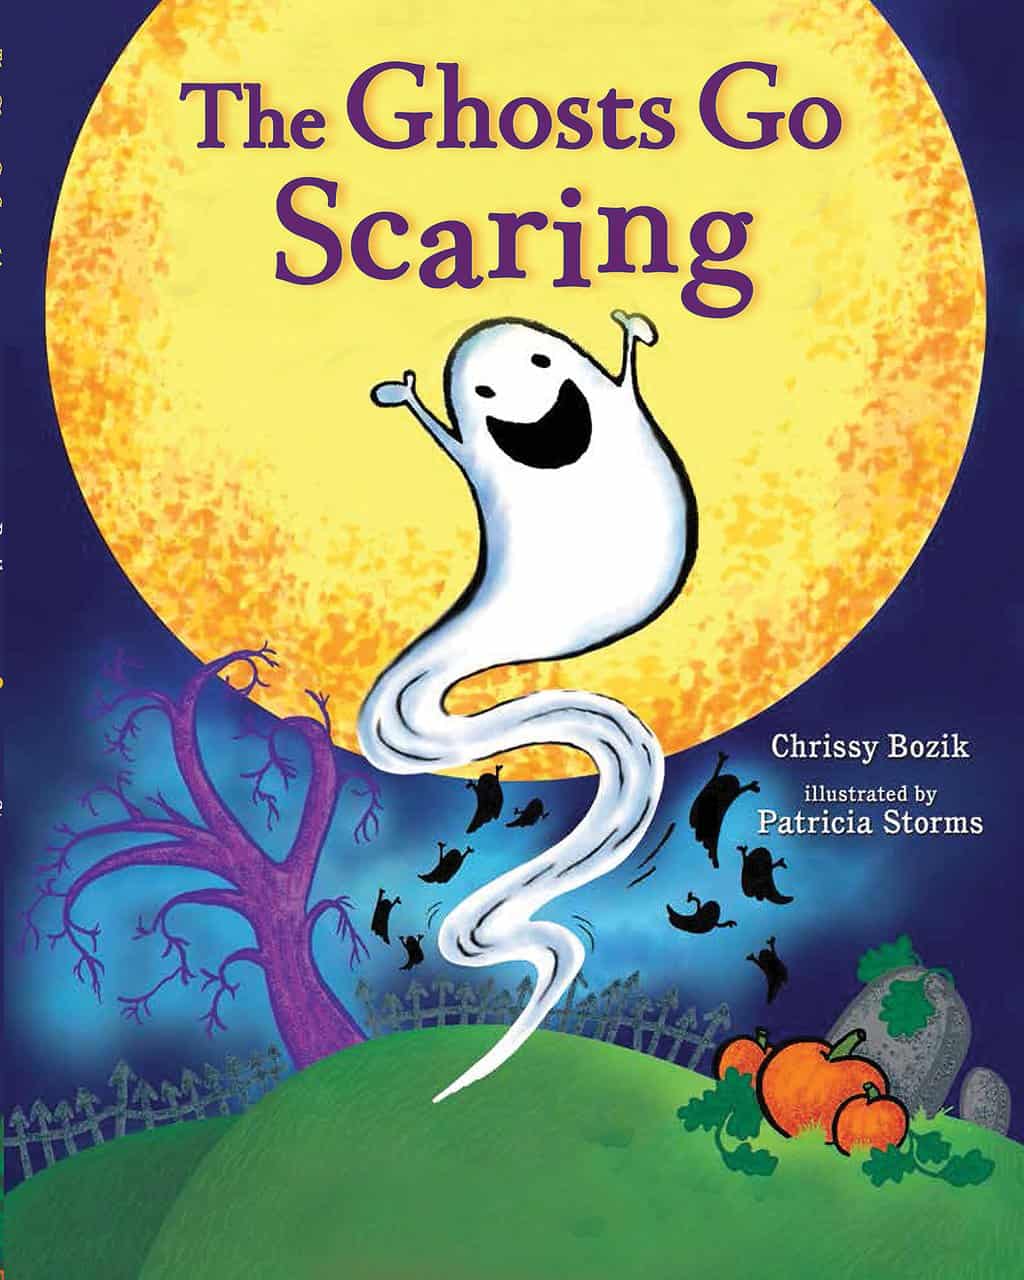 The Ghosts go Scaring book cover